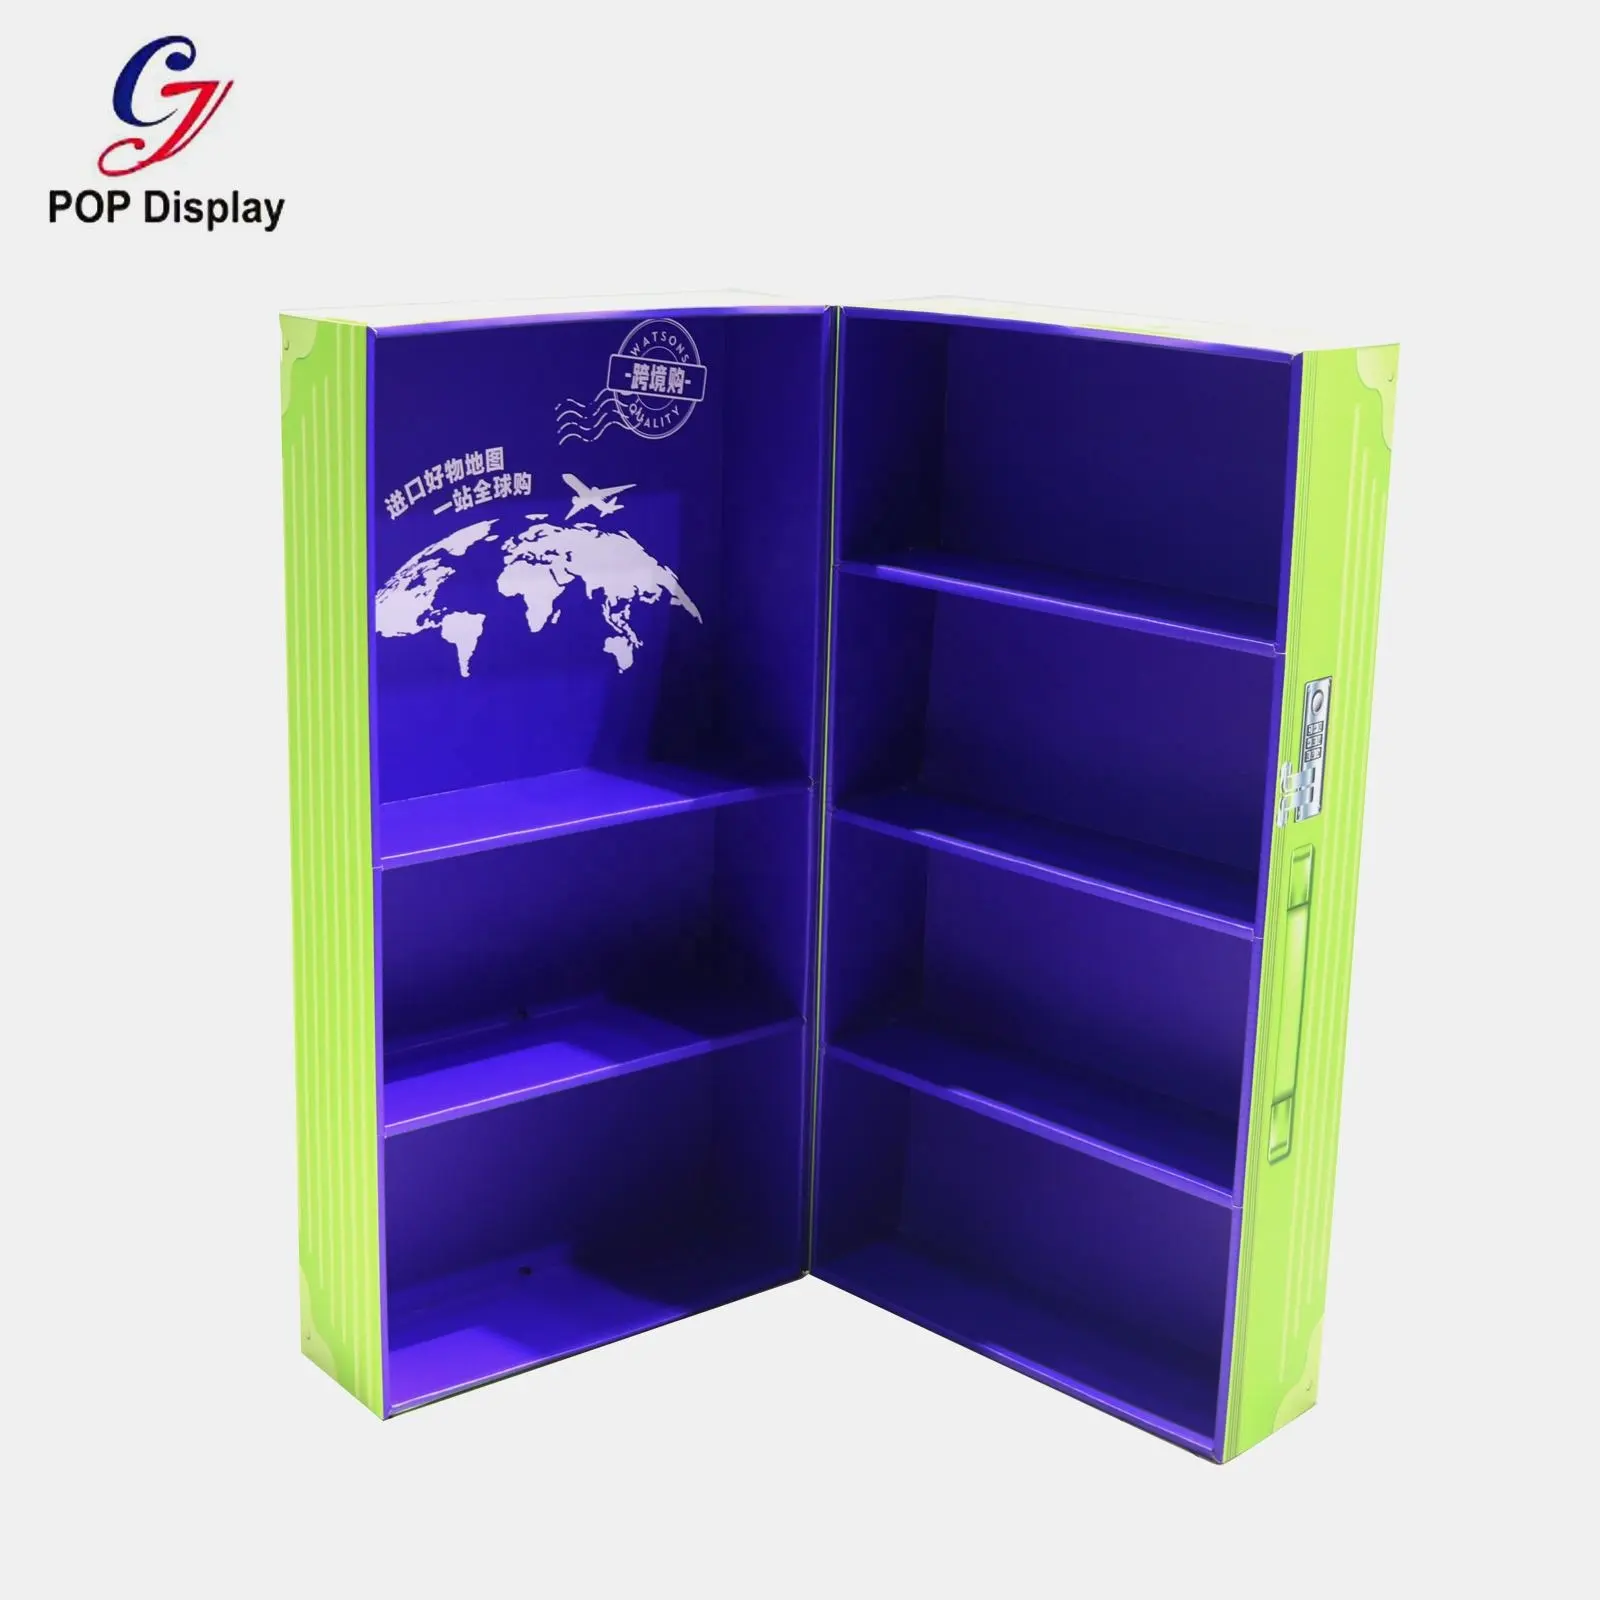 Custom Brand Daily Goods Display Stand Travel Box Display Container Box For Shampoo Skin Care Sweet Candy Product Shop Promotion